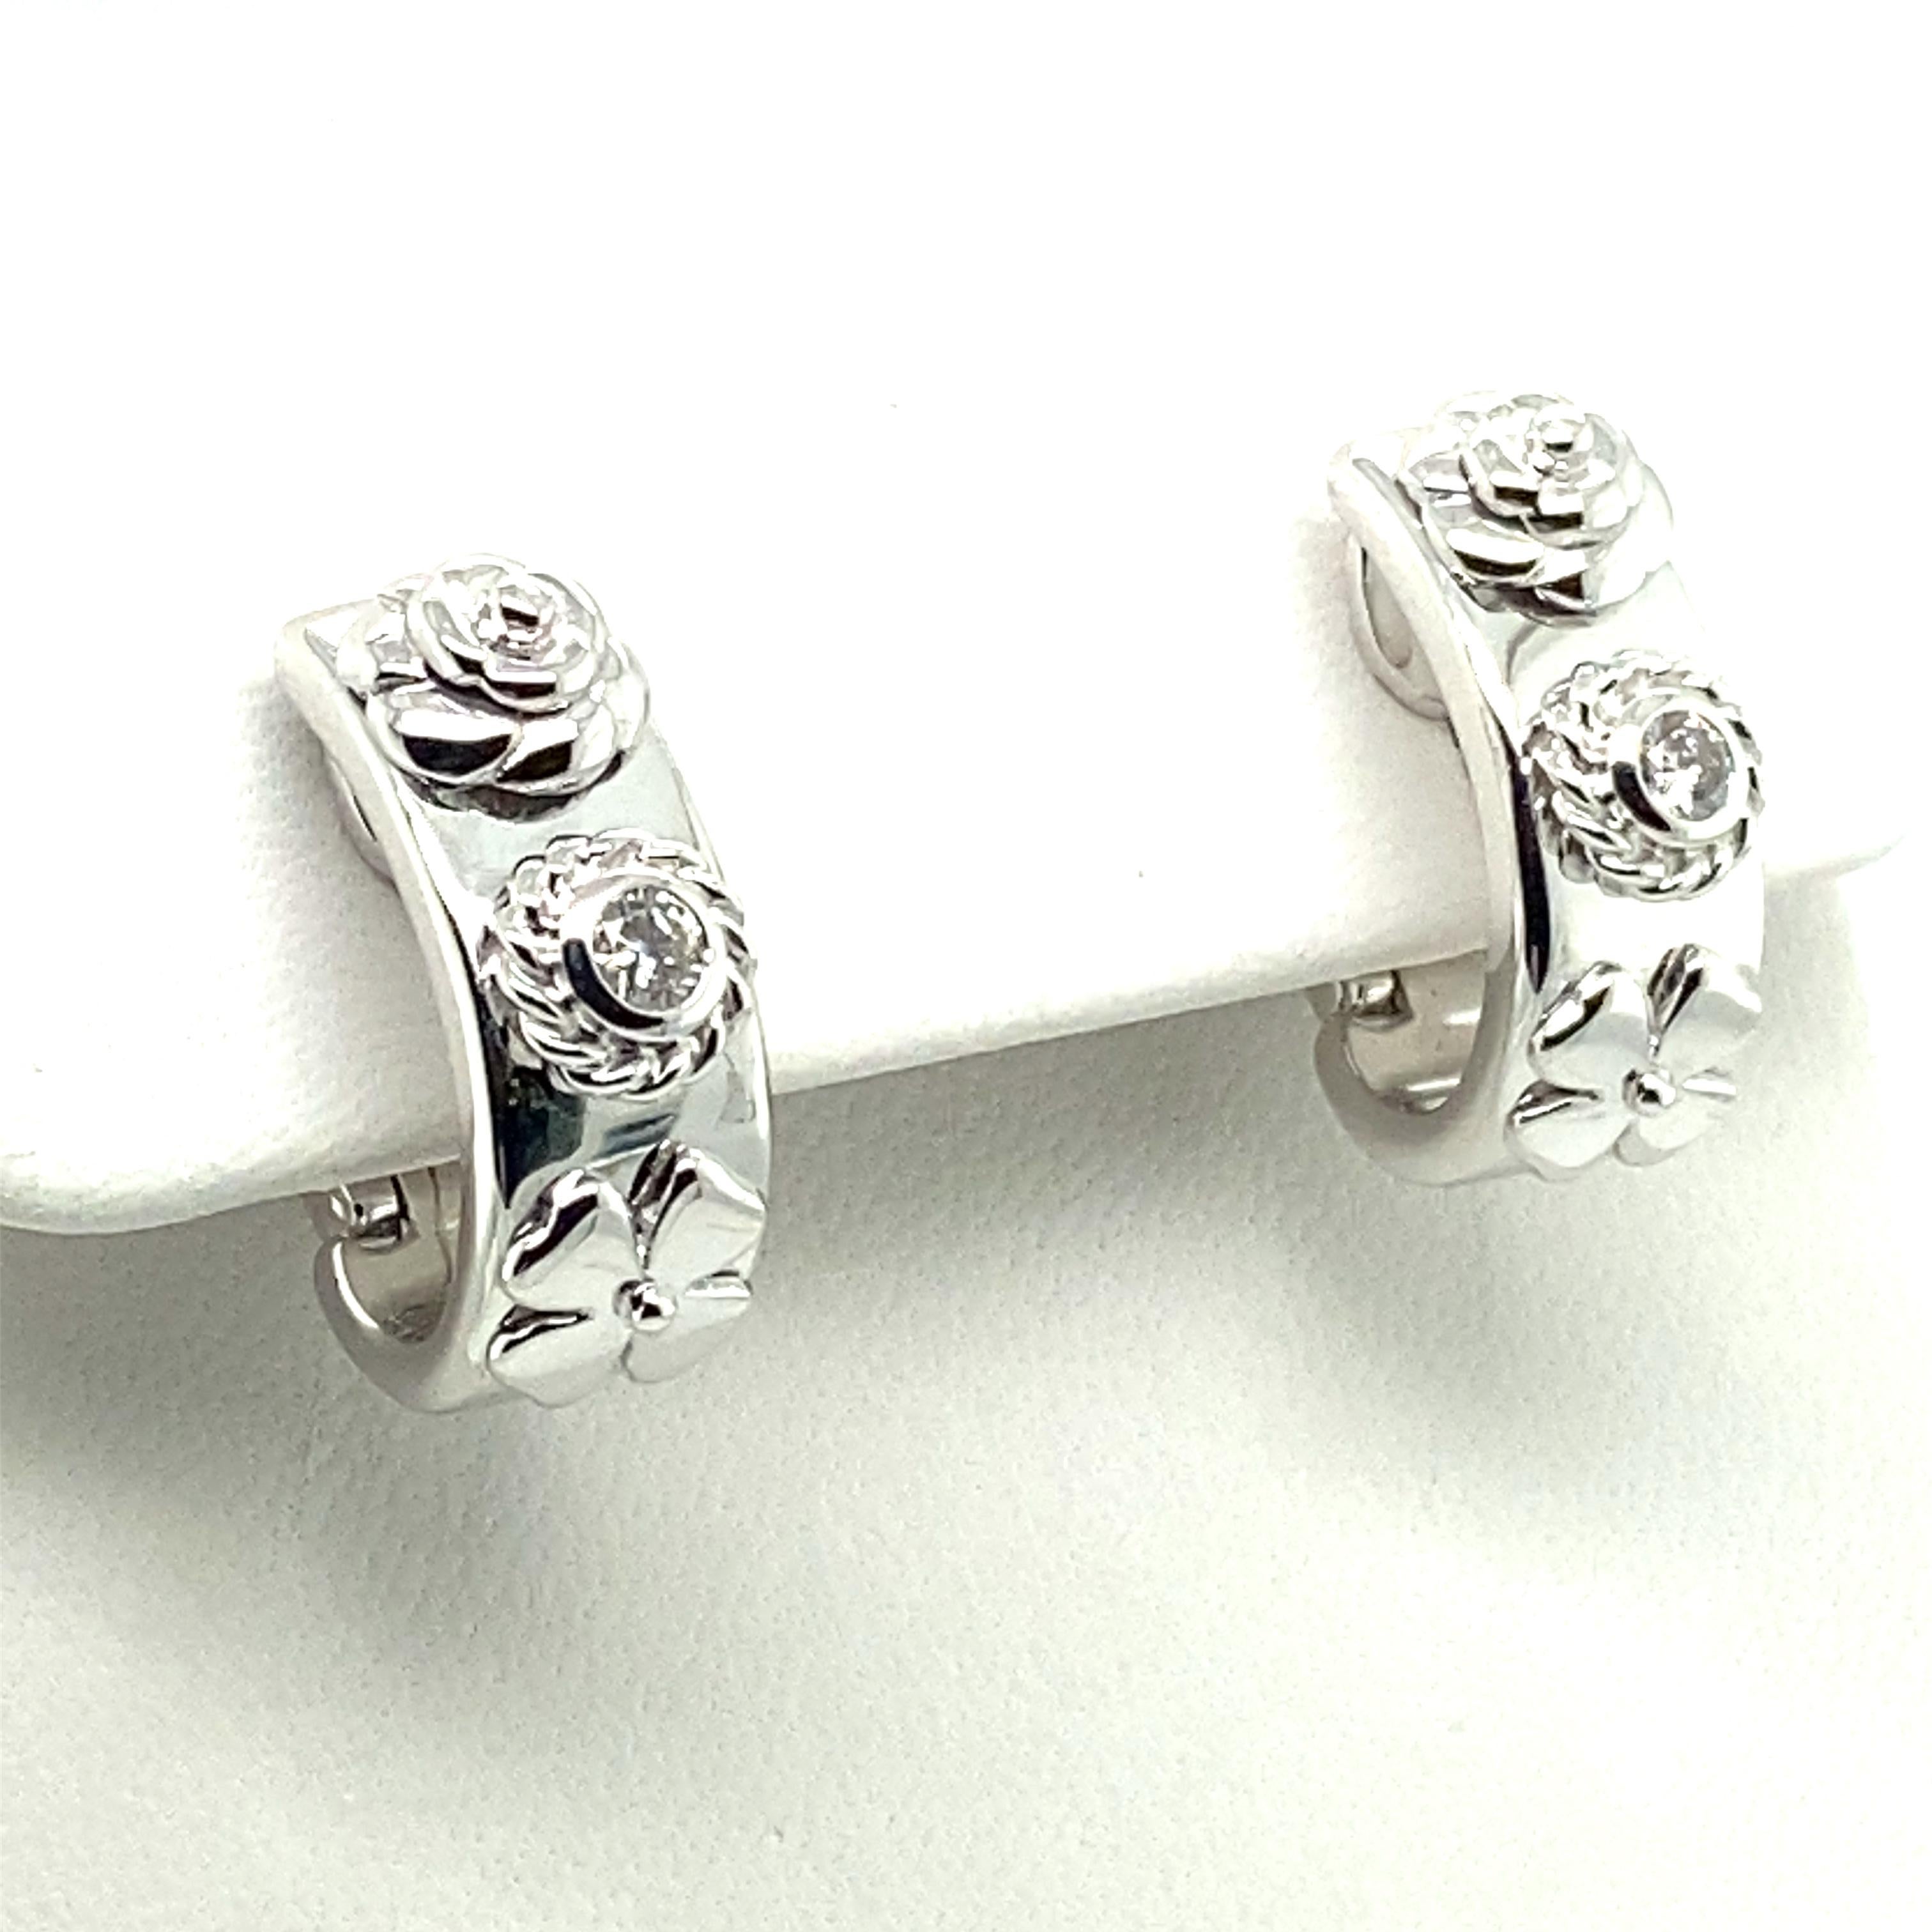 Brilliant Cut Chanel Diamond Four-Leaf Clovers and Camelia Earclips in 18 Karat White Gold